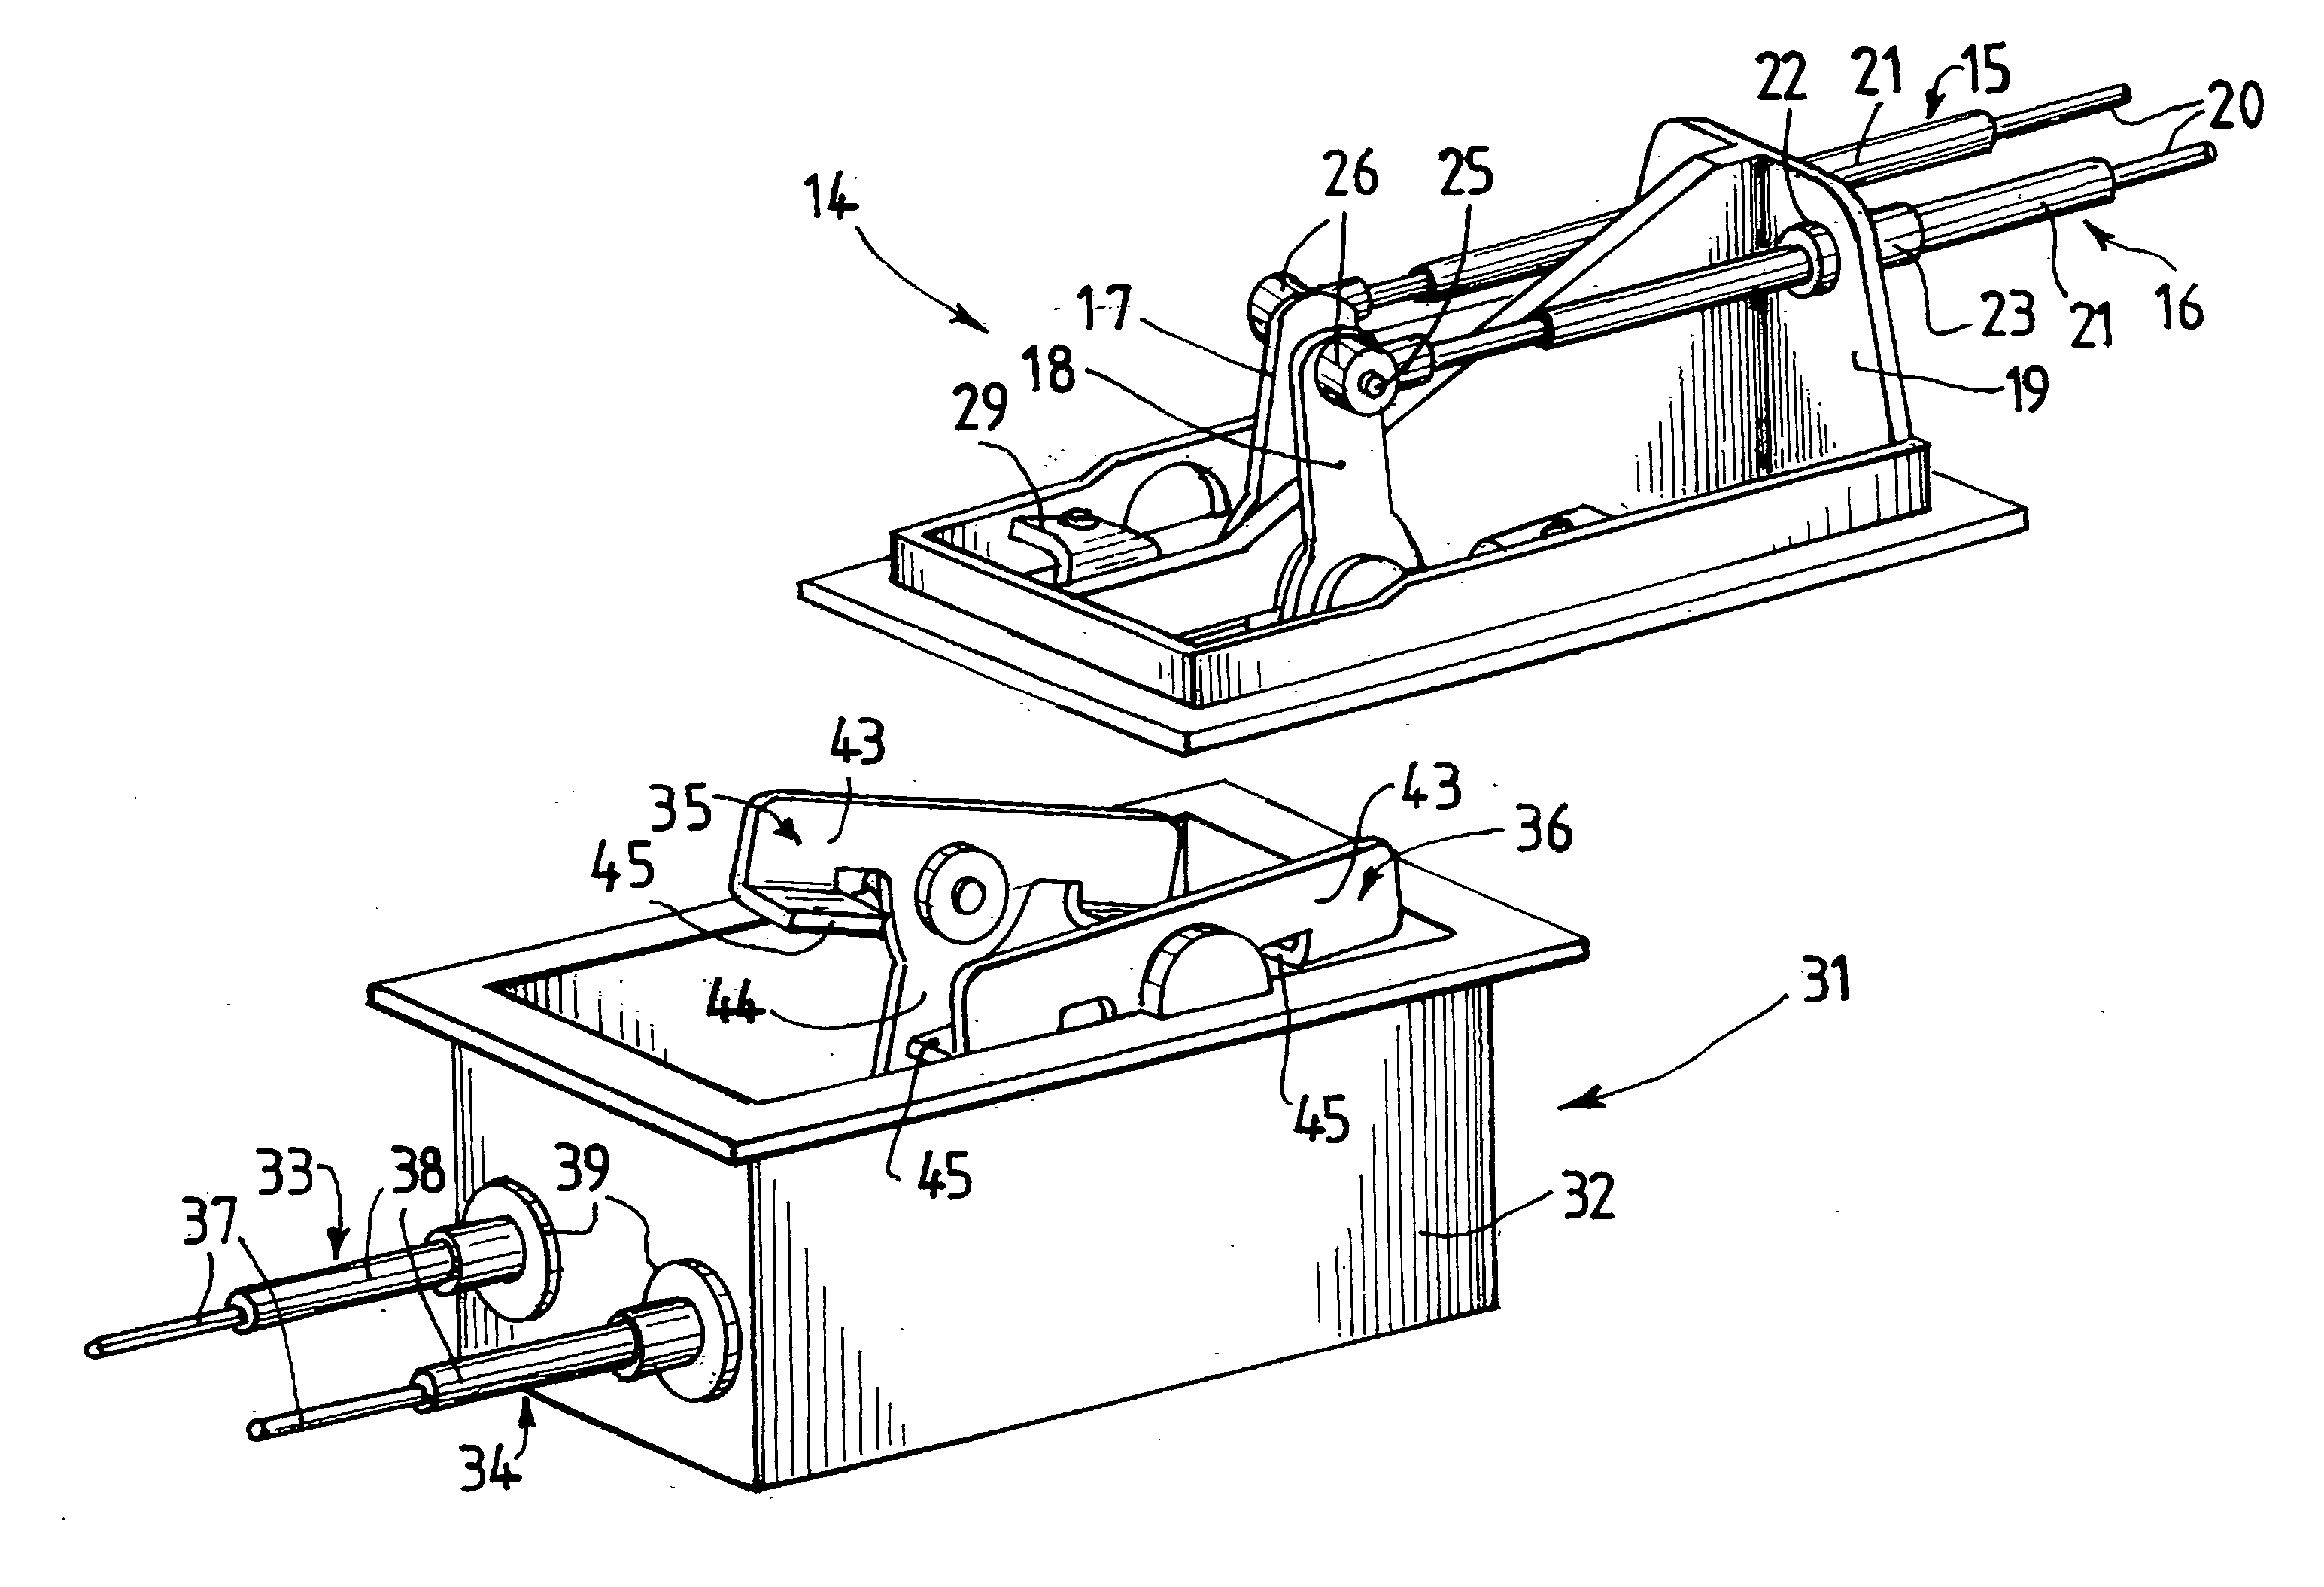 Cable and/or rod control system for a gearbox on a heavy goods vehicle with tilting cab